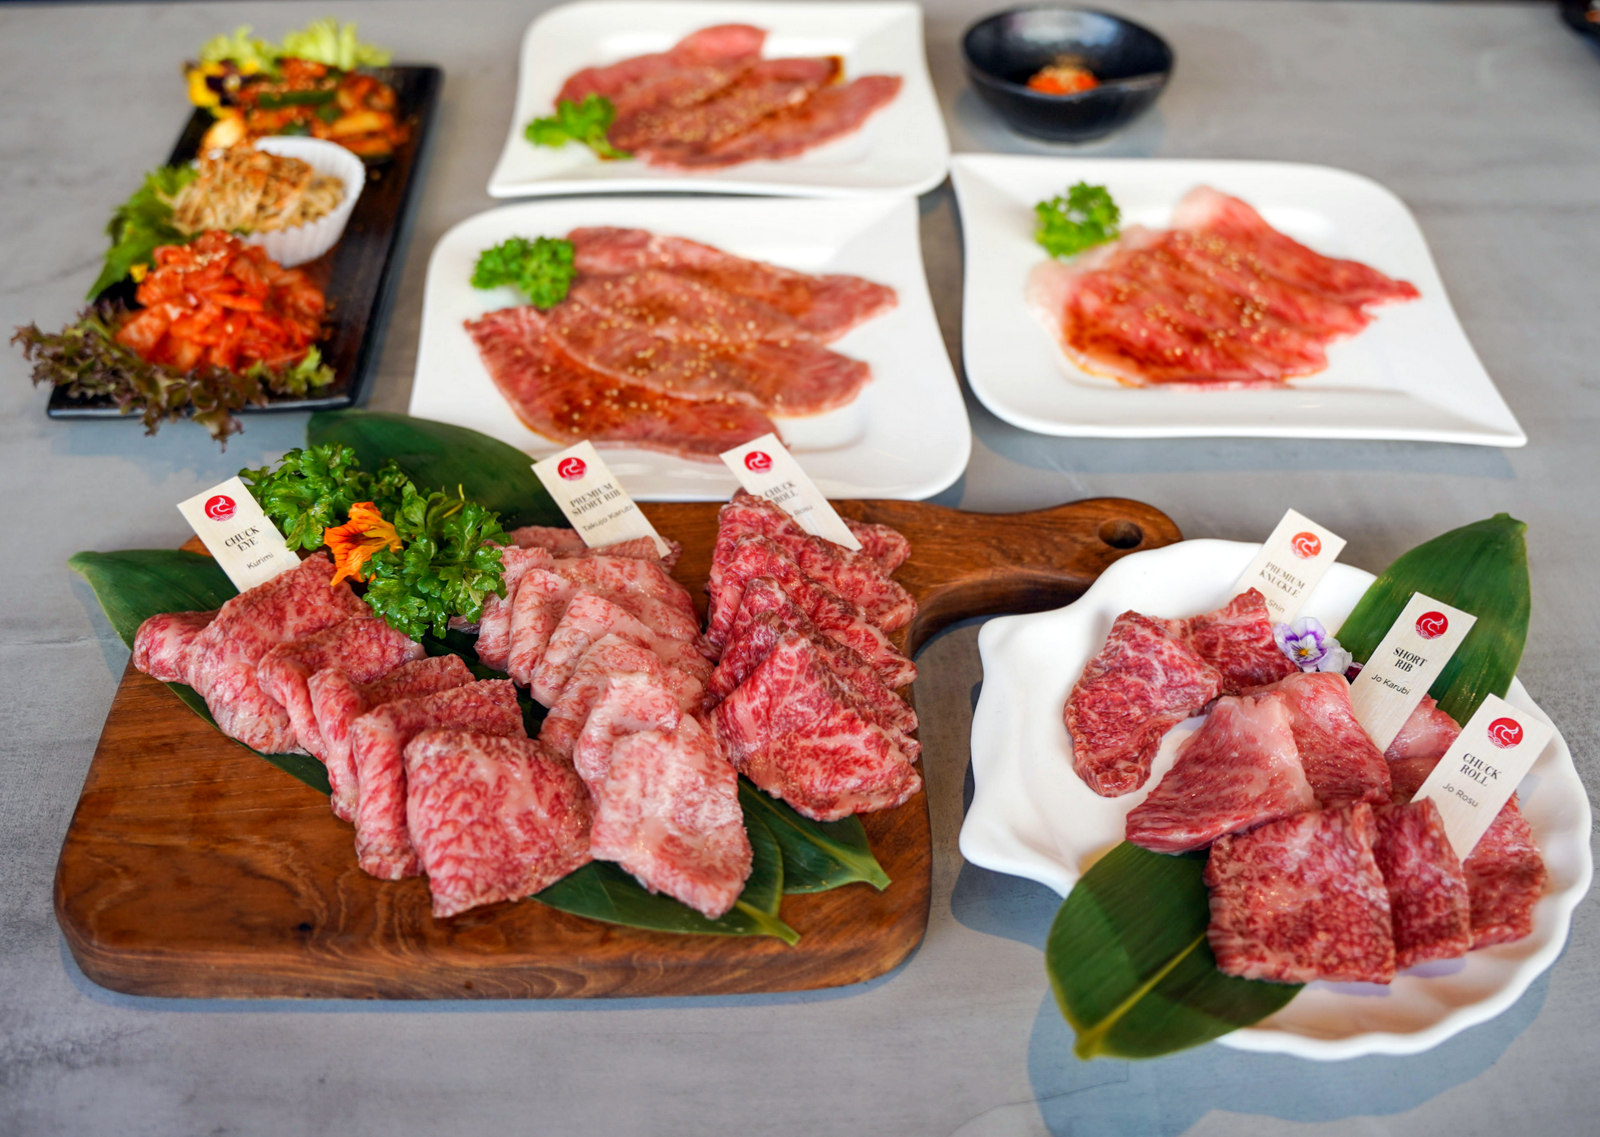 The Best Wagyu Beef In Kl - Infoupdate.org